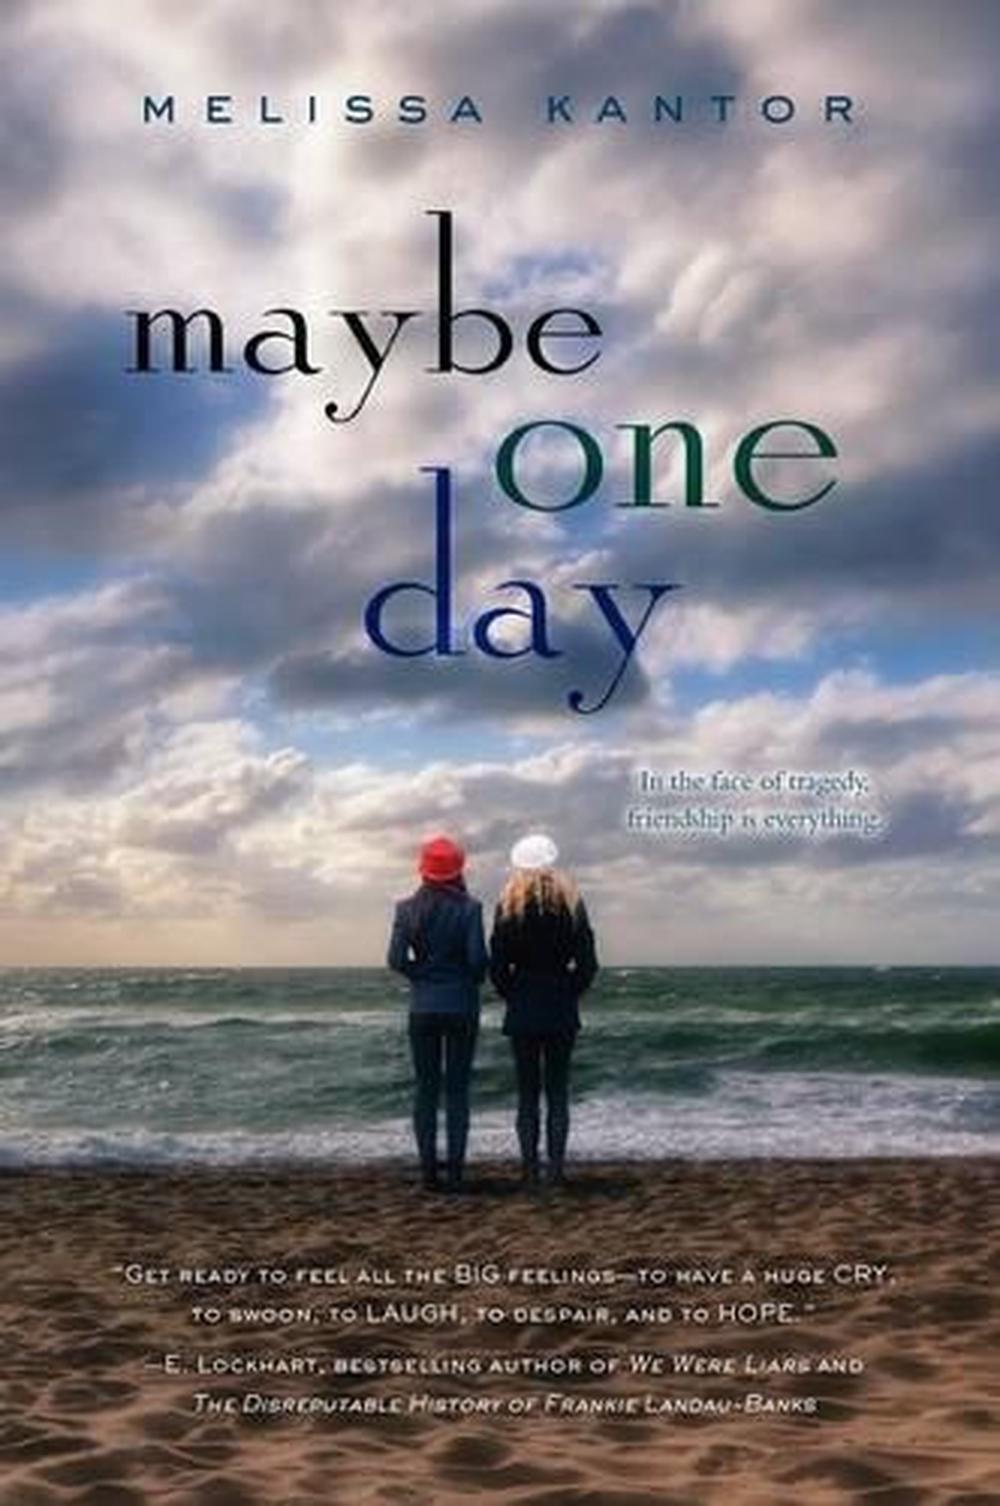 Maybe One Day by Melissa Kantor, Paperback, 9780062279217 | Buy online ...